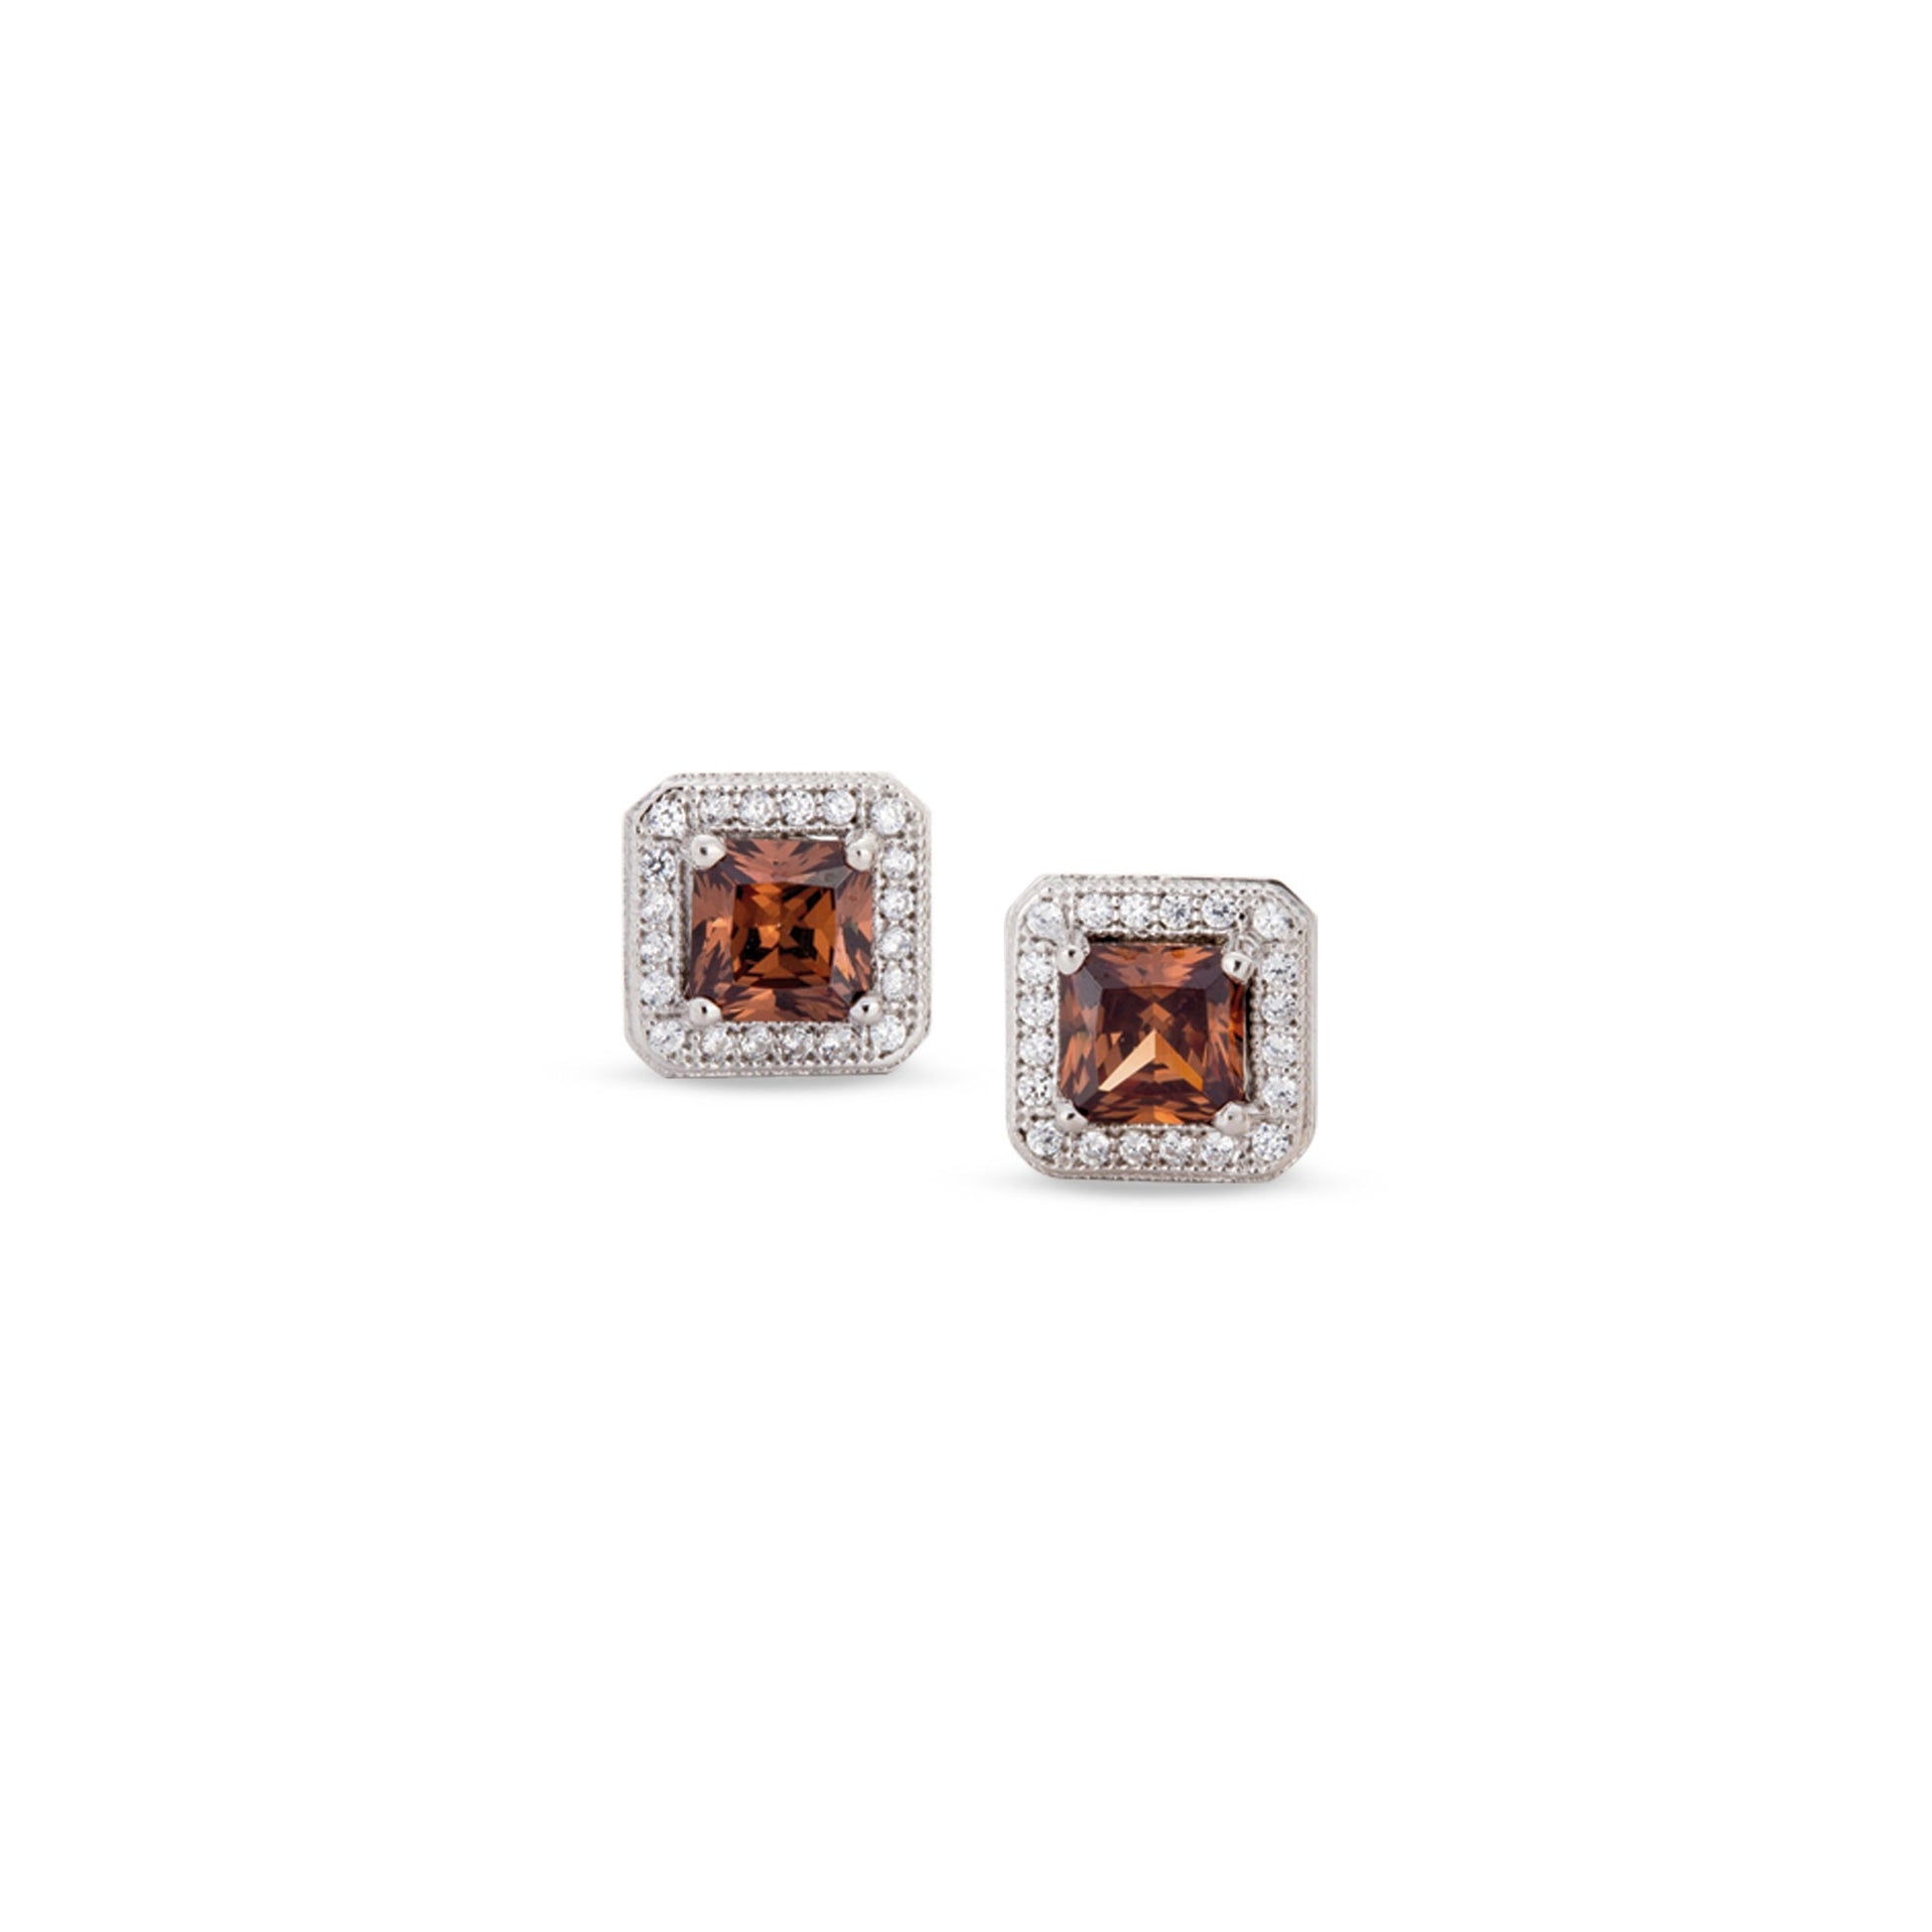 A princess cut brown earrings with simulated diamonds displayed on a neutral white background.